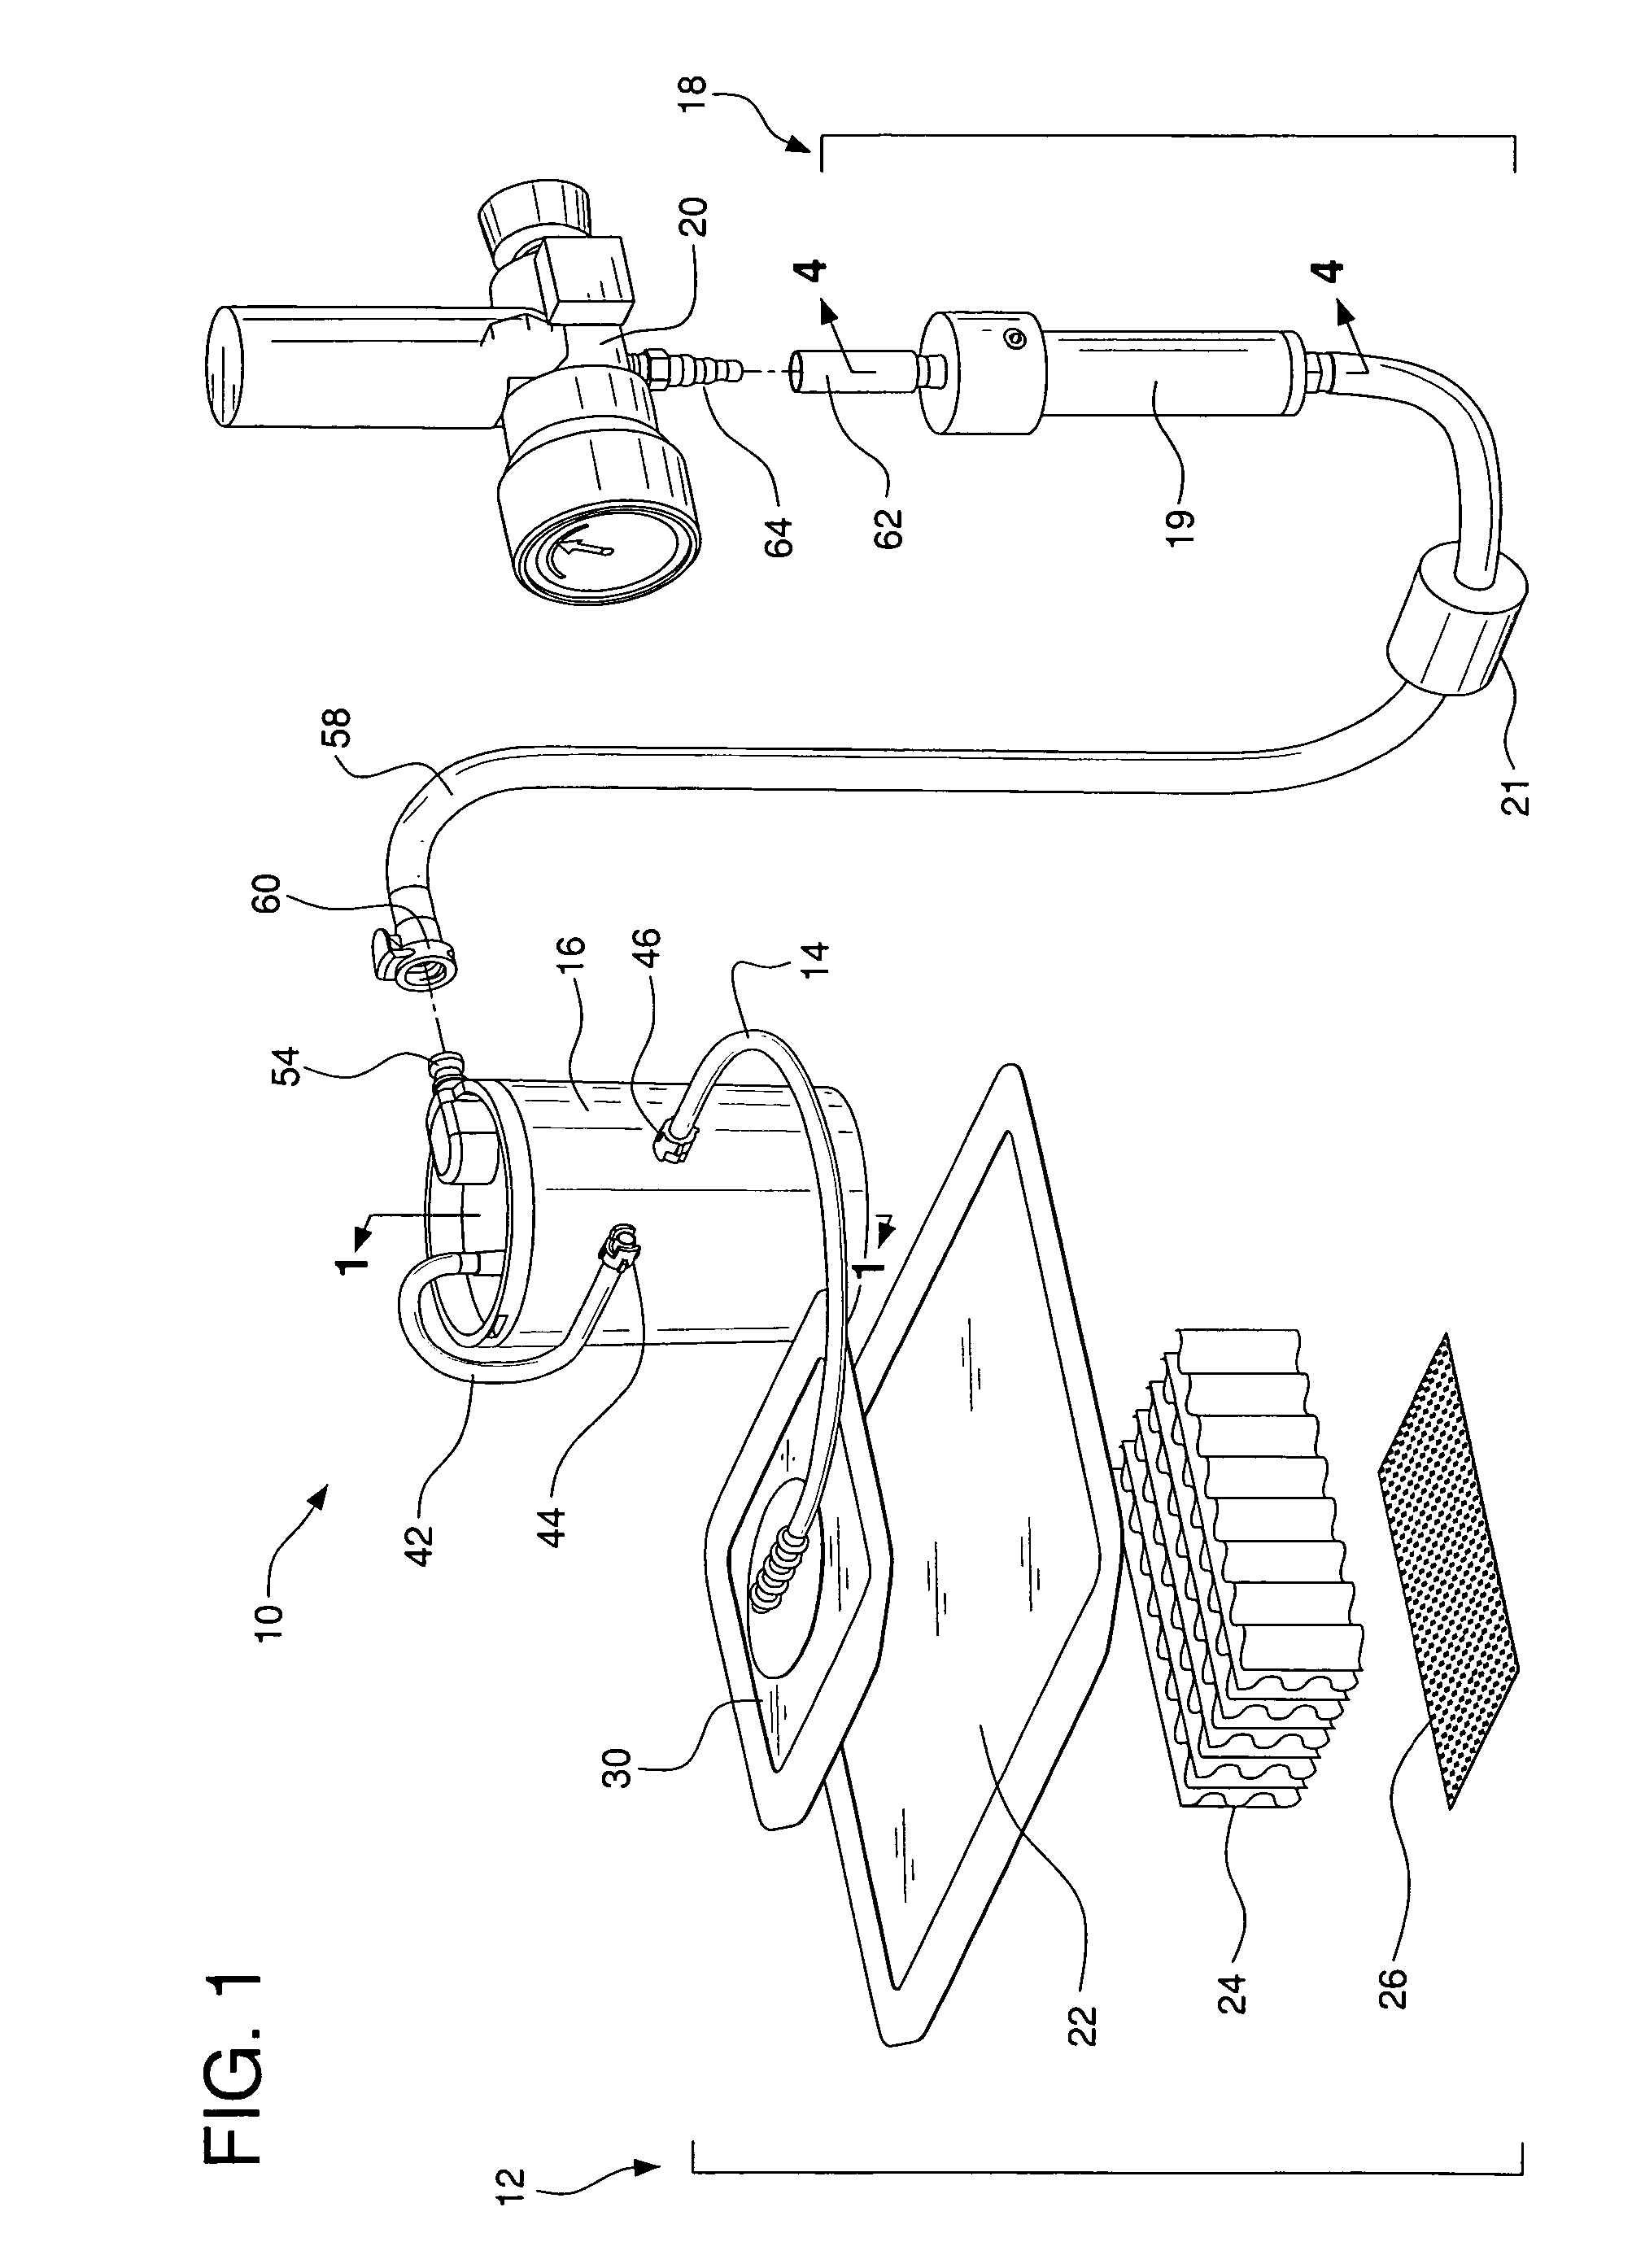 System for treating a wound with suction and method of detecting loss of suction